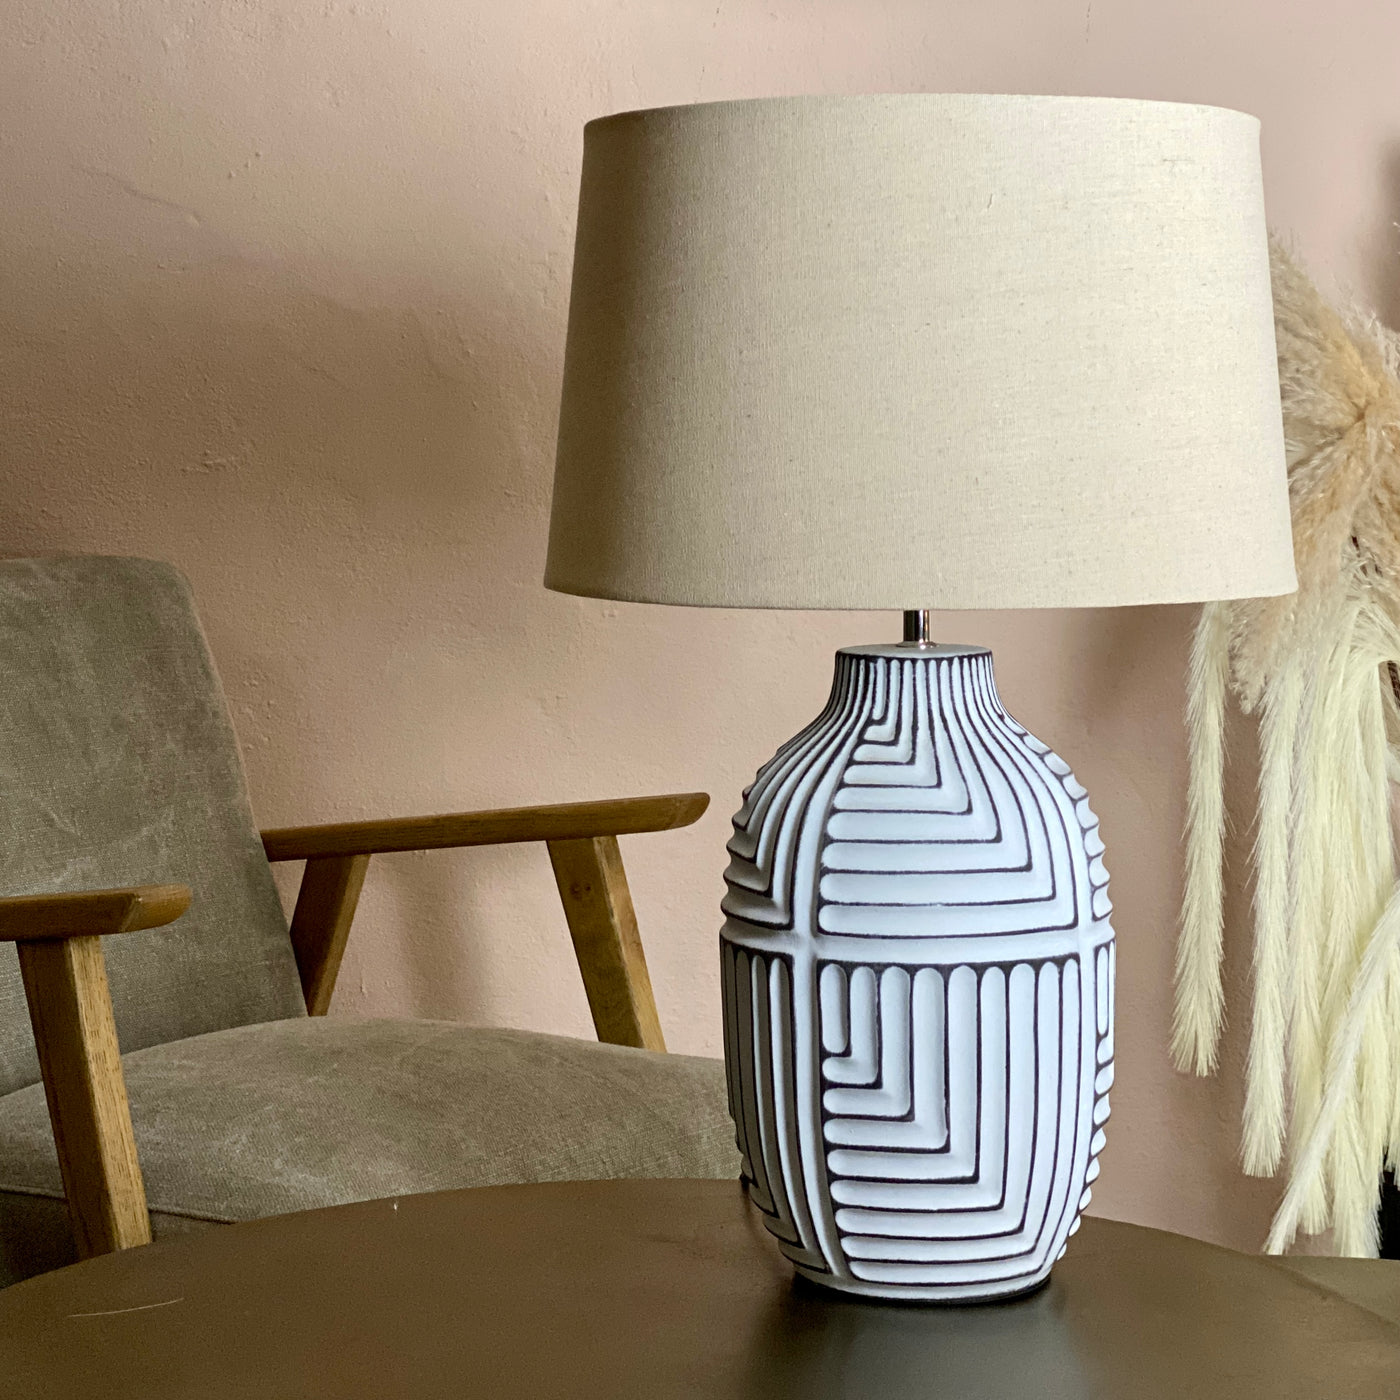 Monochrome Large Ceramic Table Lamp with Shade - Mrs Robinson